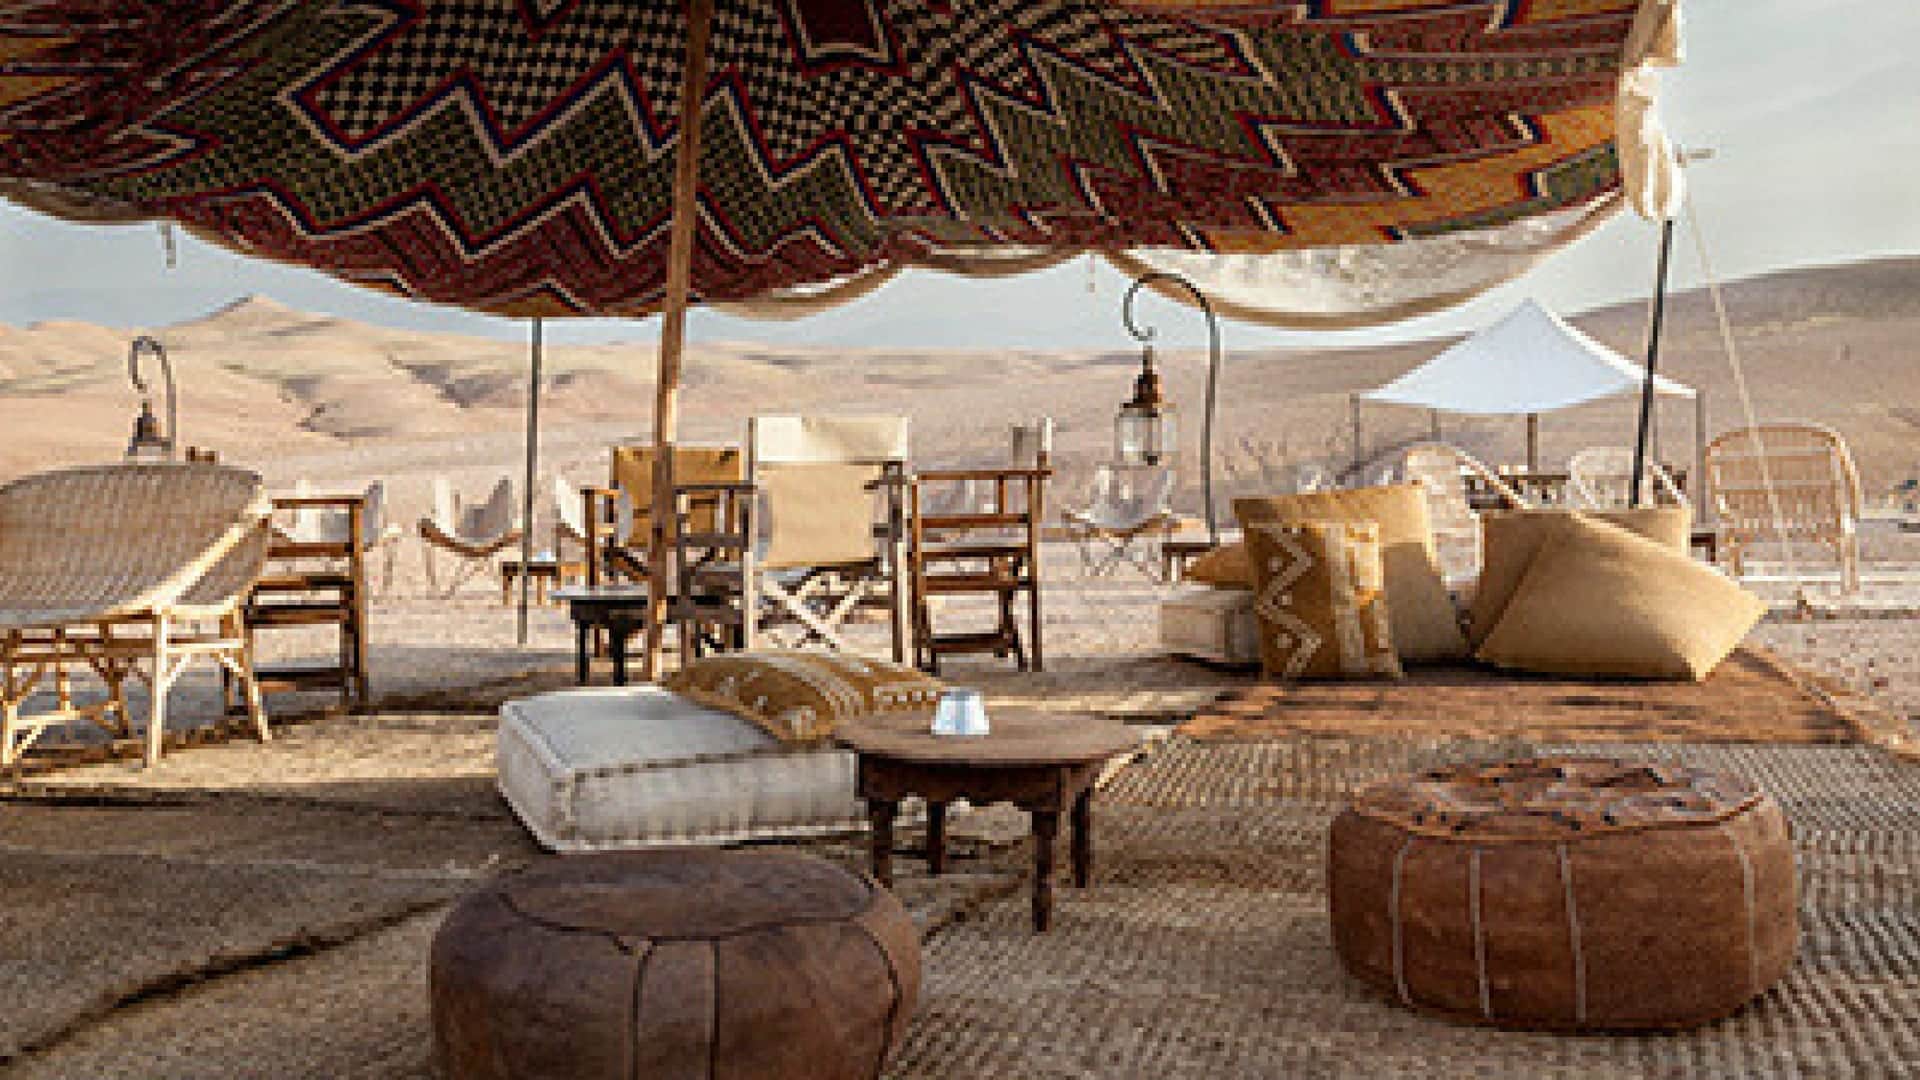 A luxury lounge in the Moroccan desert Scarabeo Stone Camp